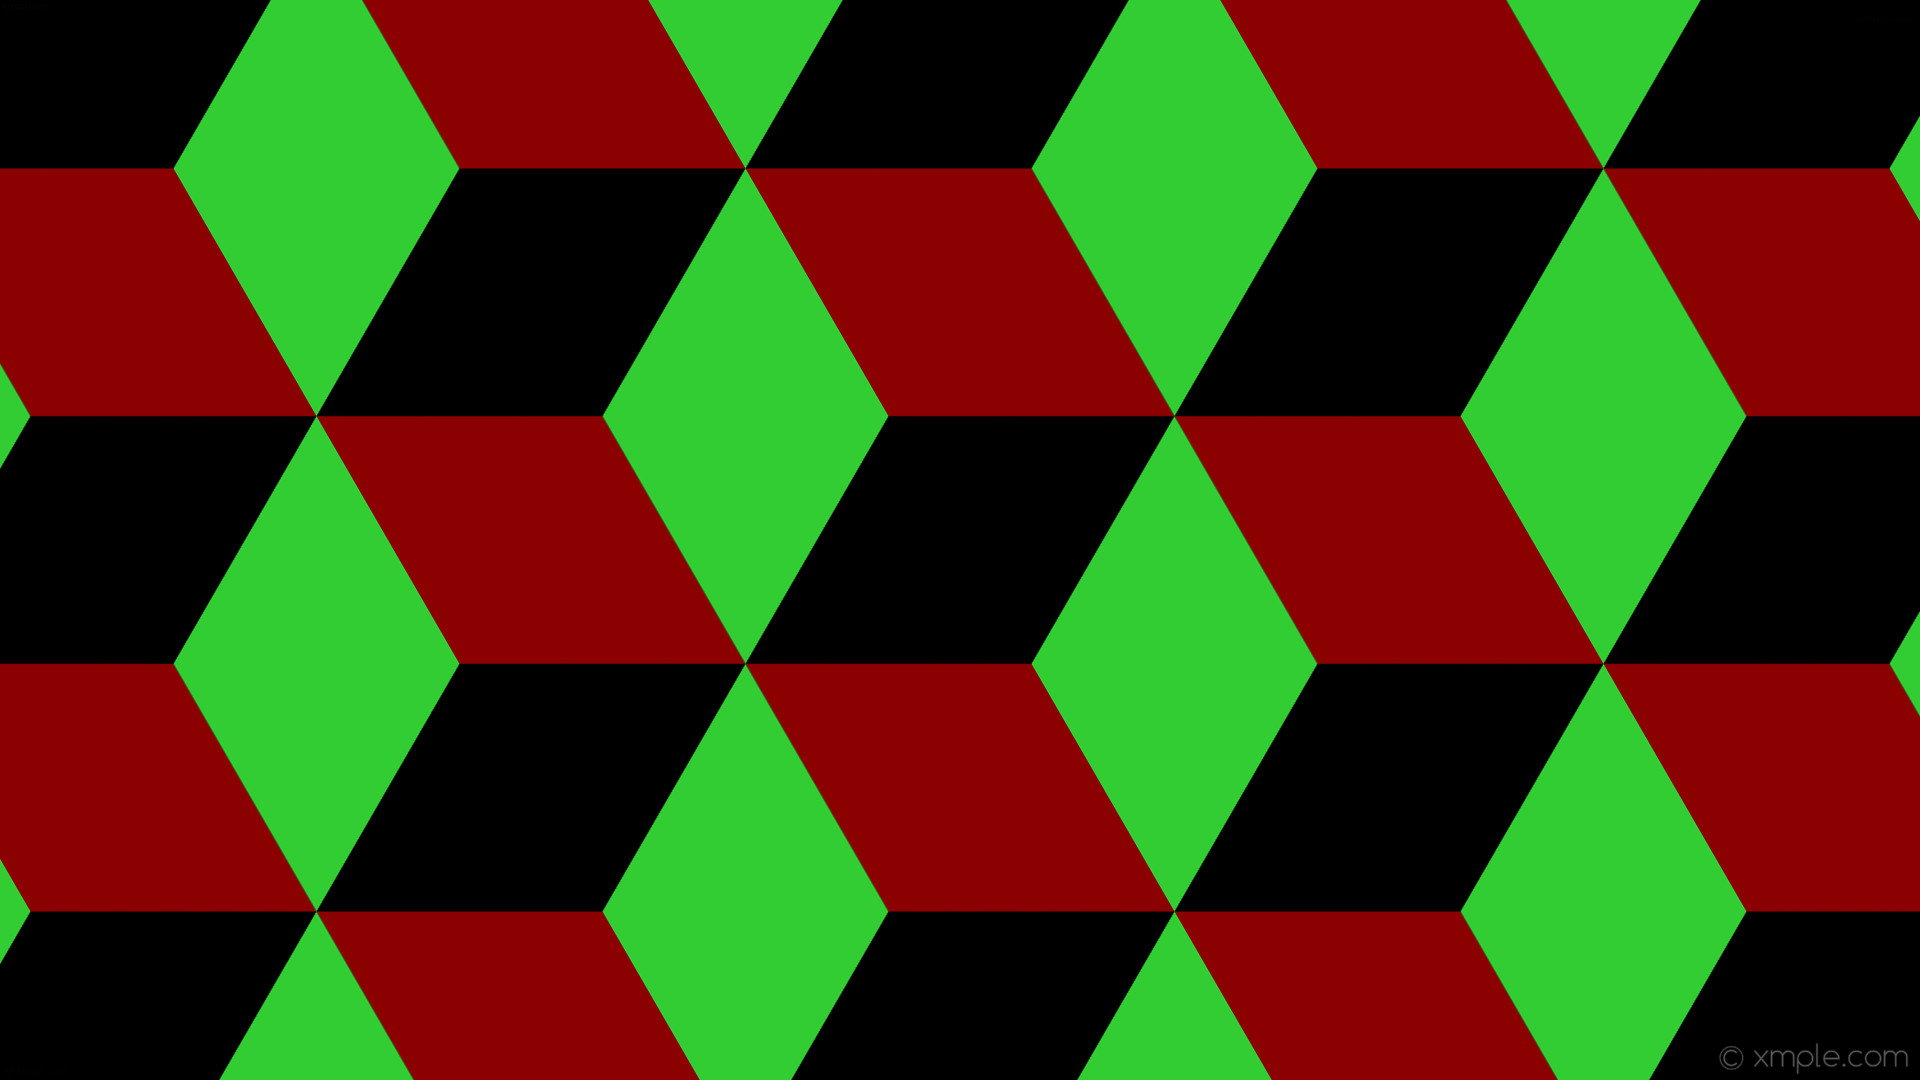 red and green wallpaper,green,red,pattern,colorfulness,symmetry